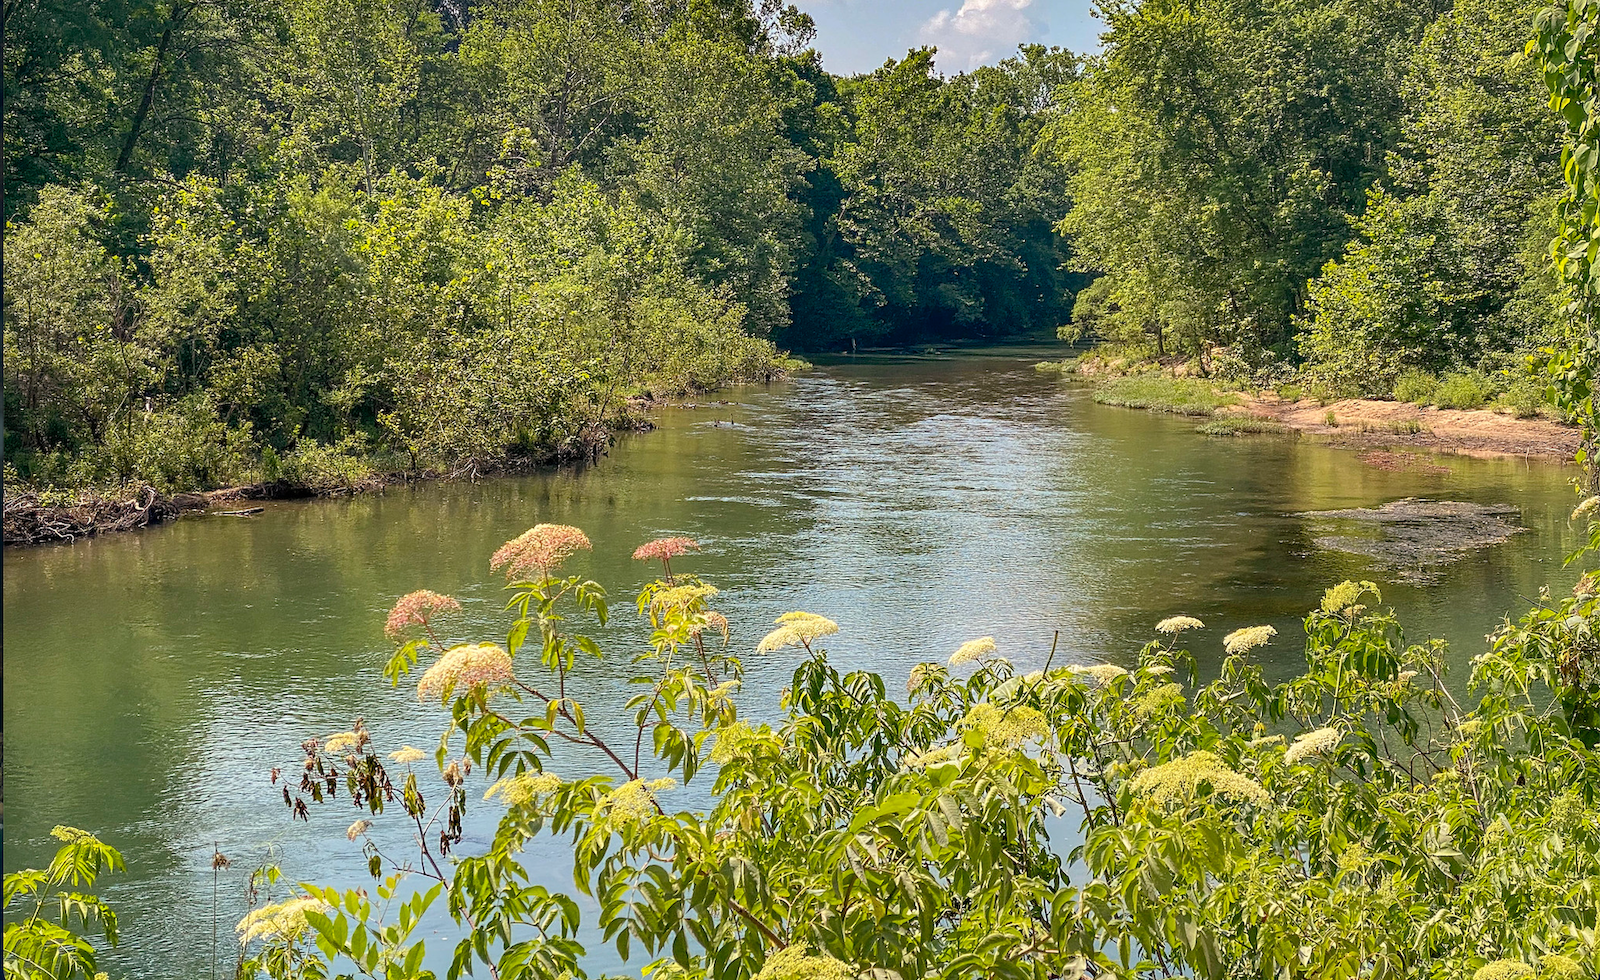 Rivers like this one in Missouri's Ozarks depend on wetlands to filter pollutants and host wildlife.